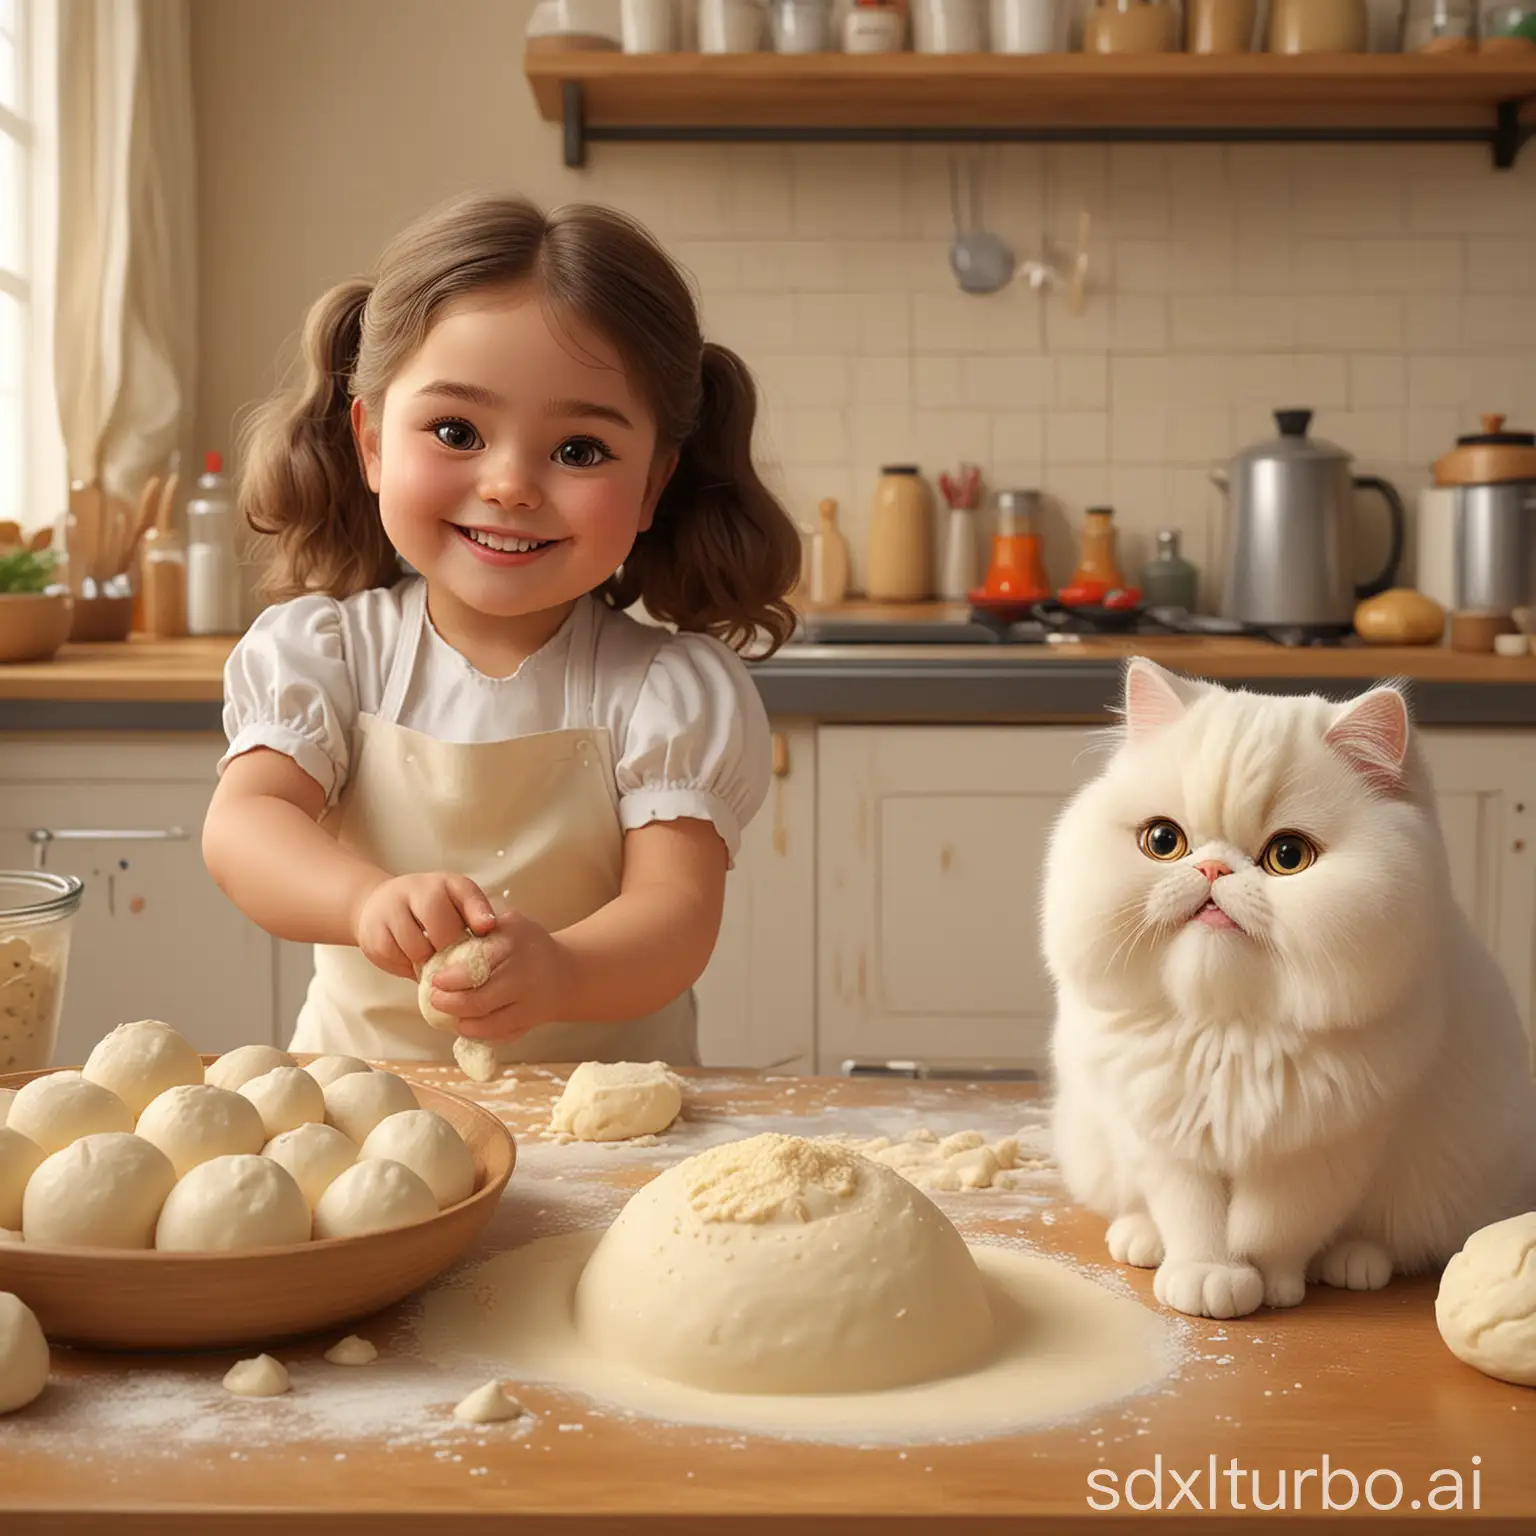 Chubby-Girl-and-Cheerful-Persian-Cat-Making-Dough-in-Minimalist-Kitchen